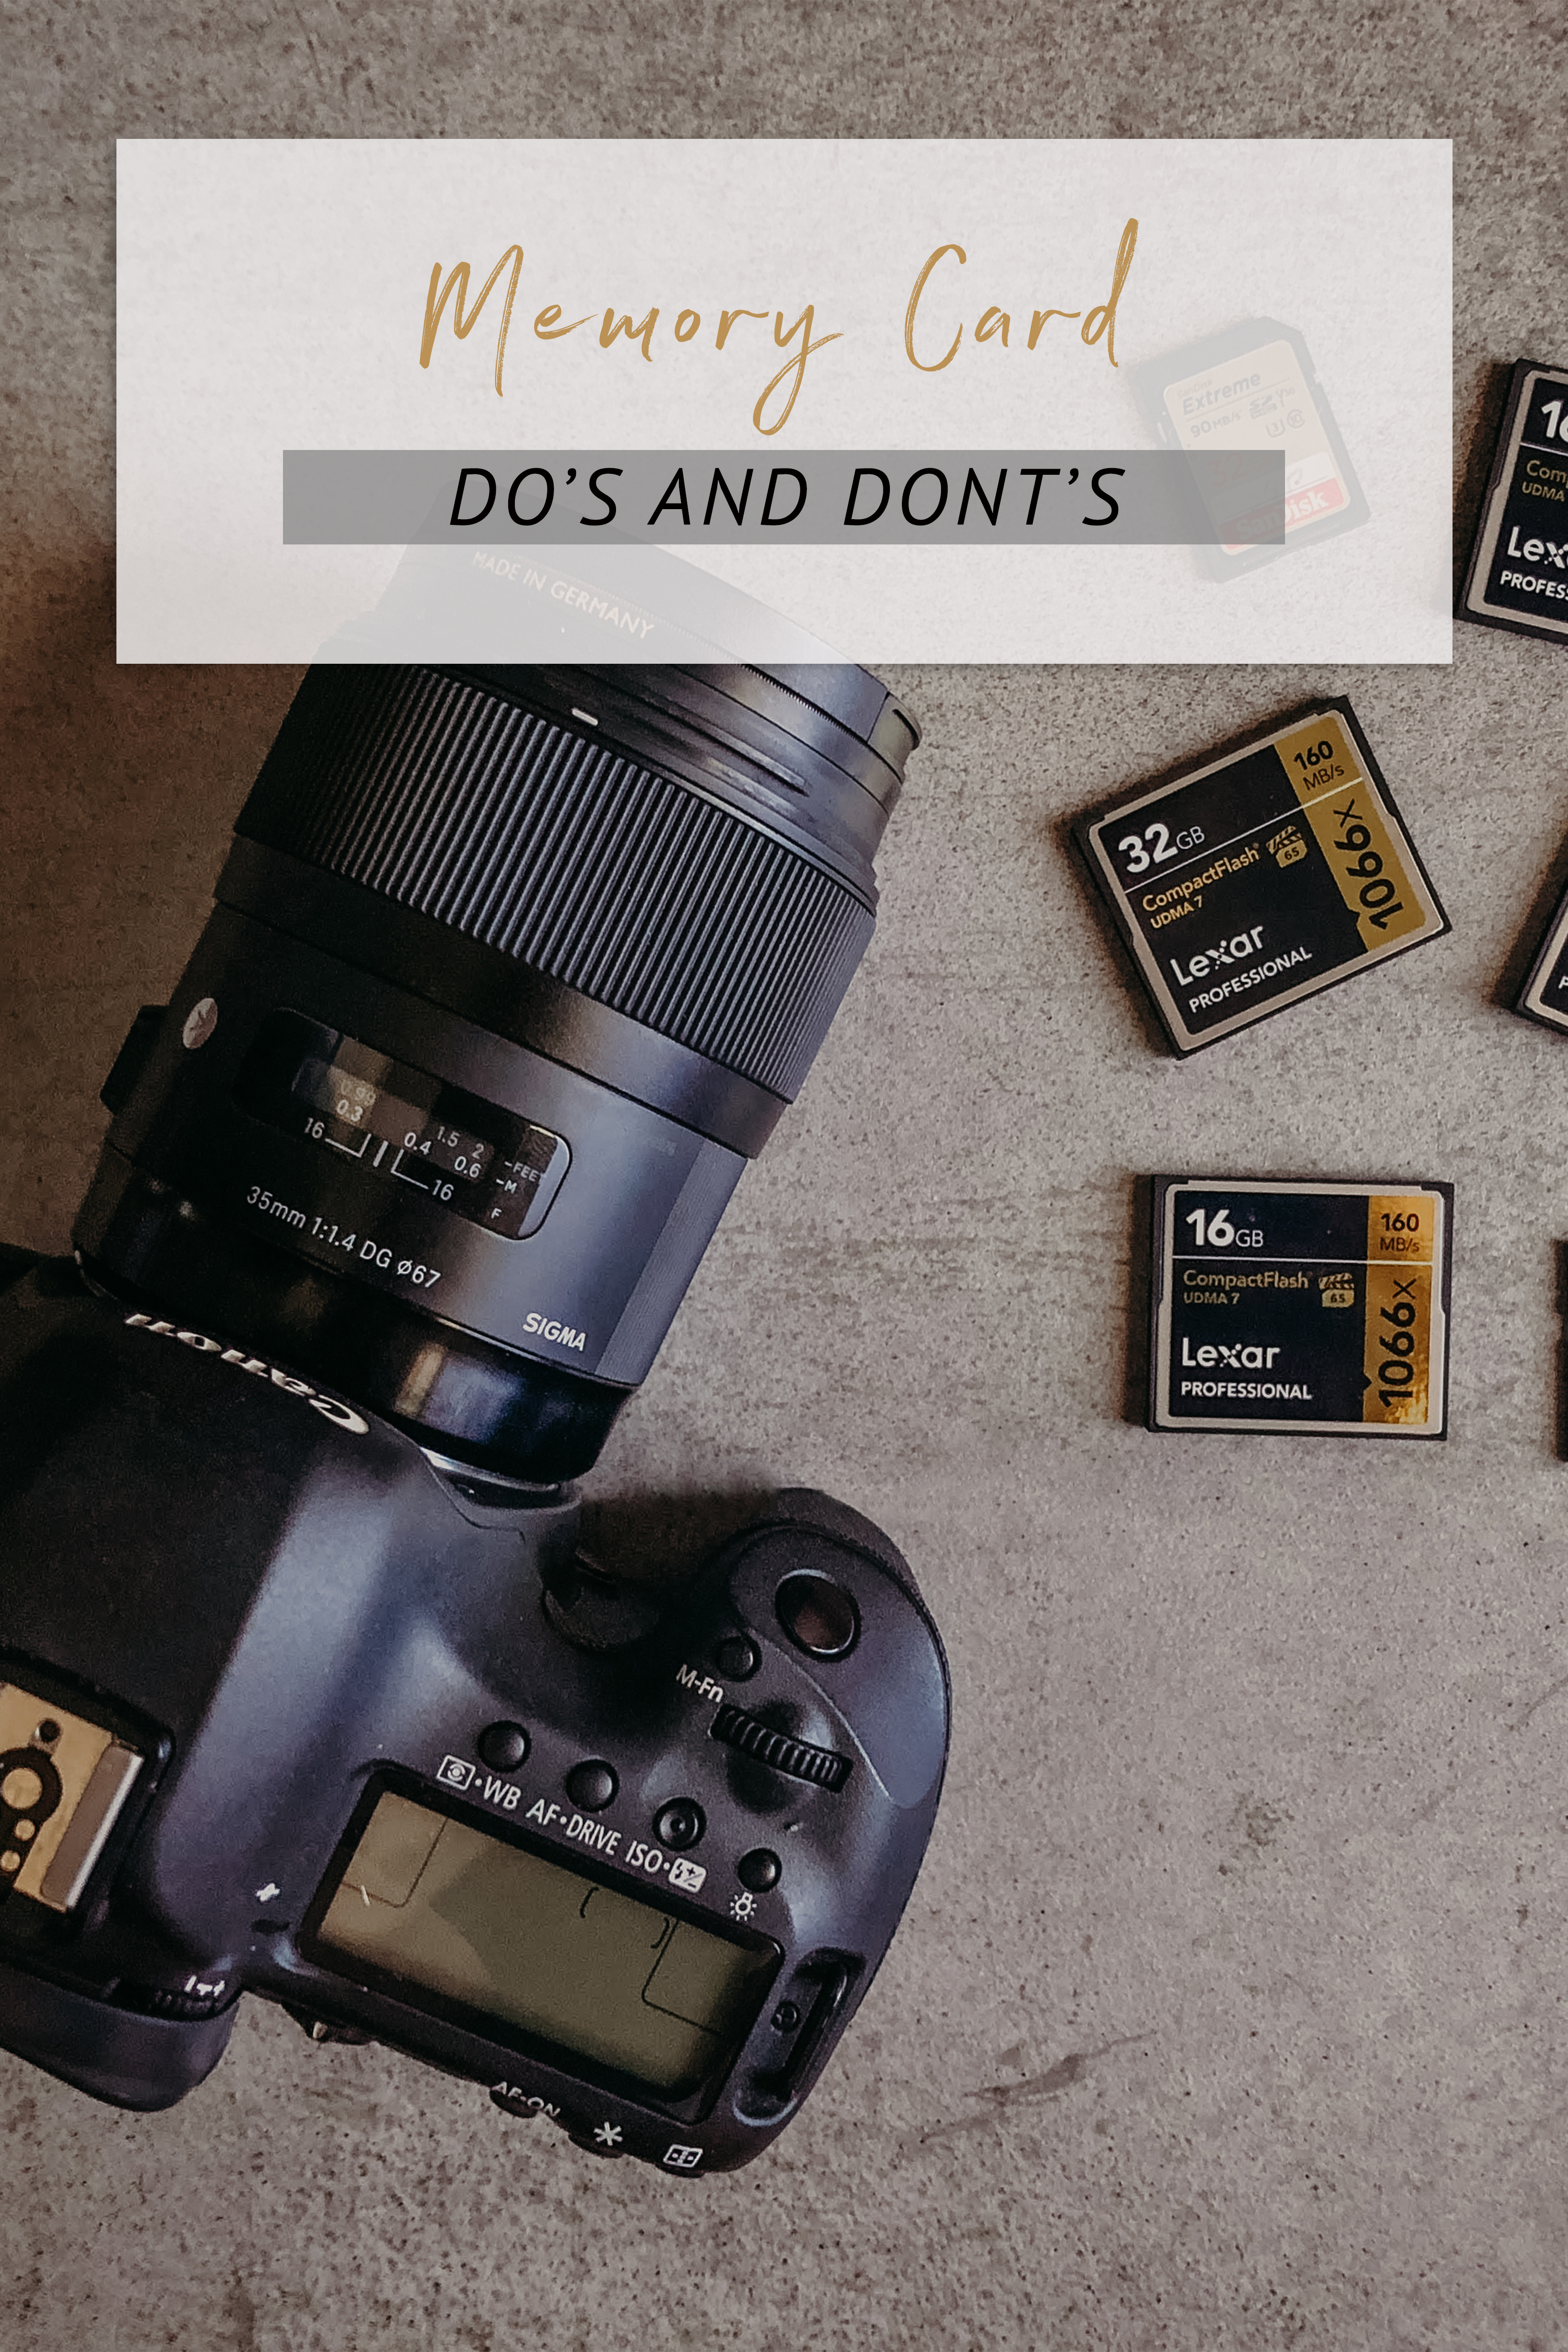 Memory Card Do's and Dont's